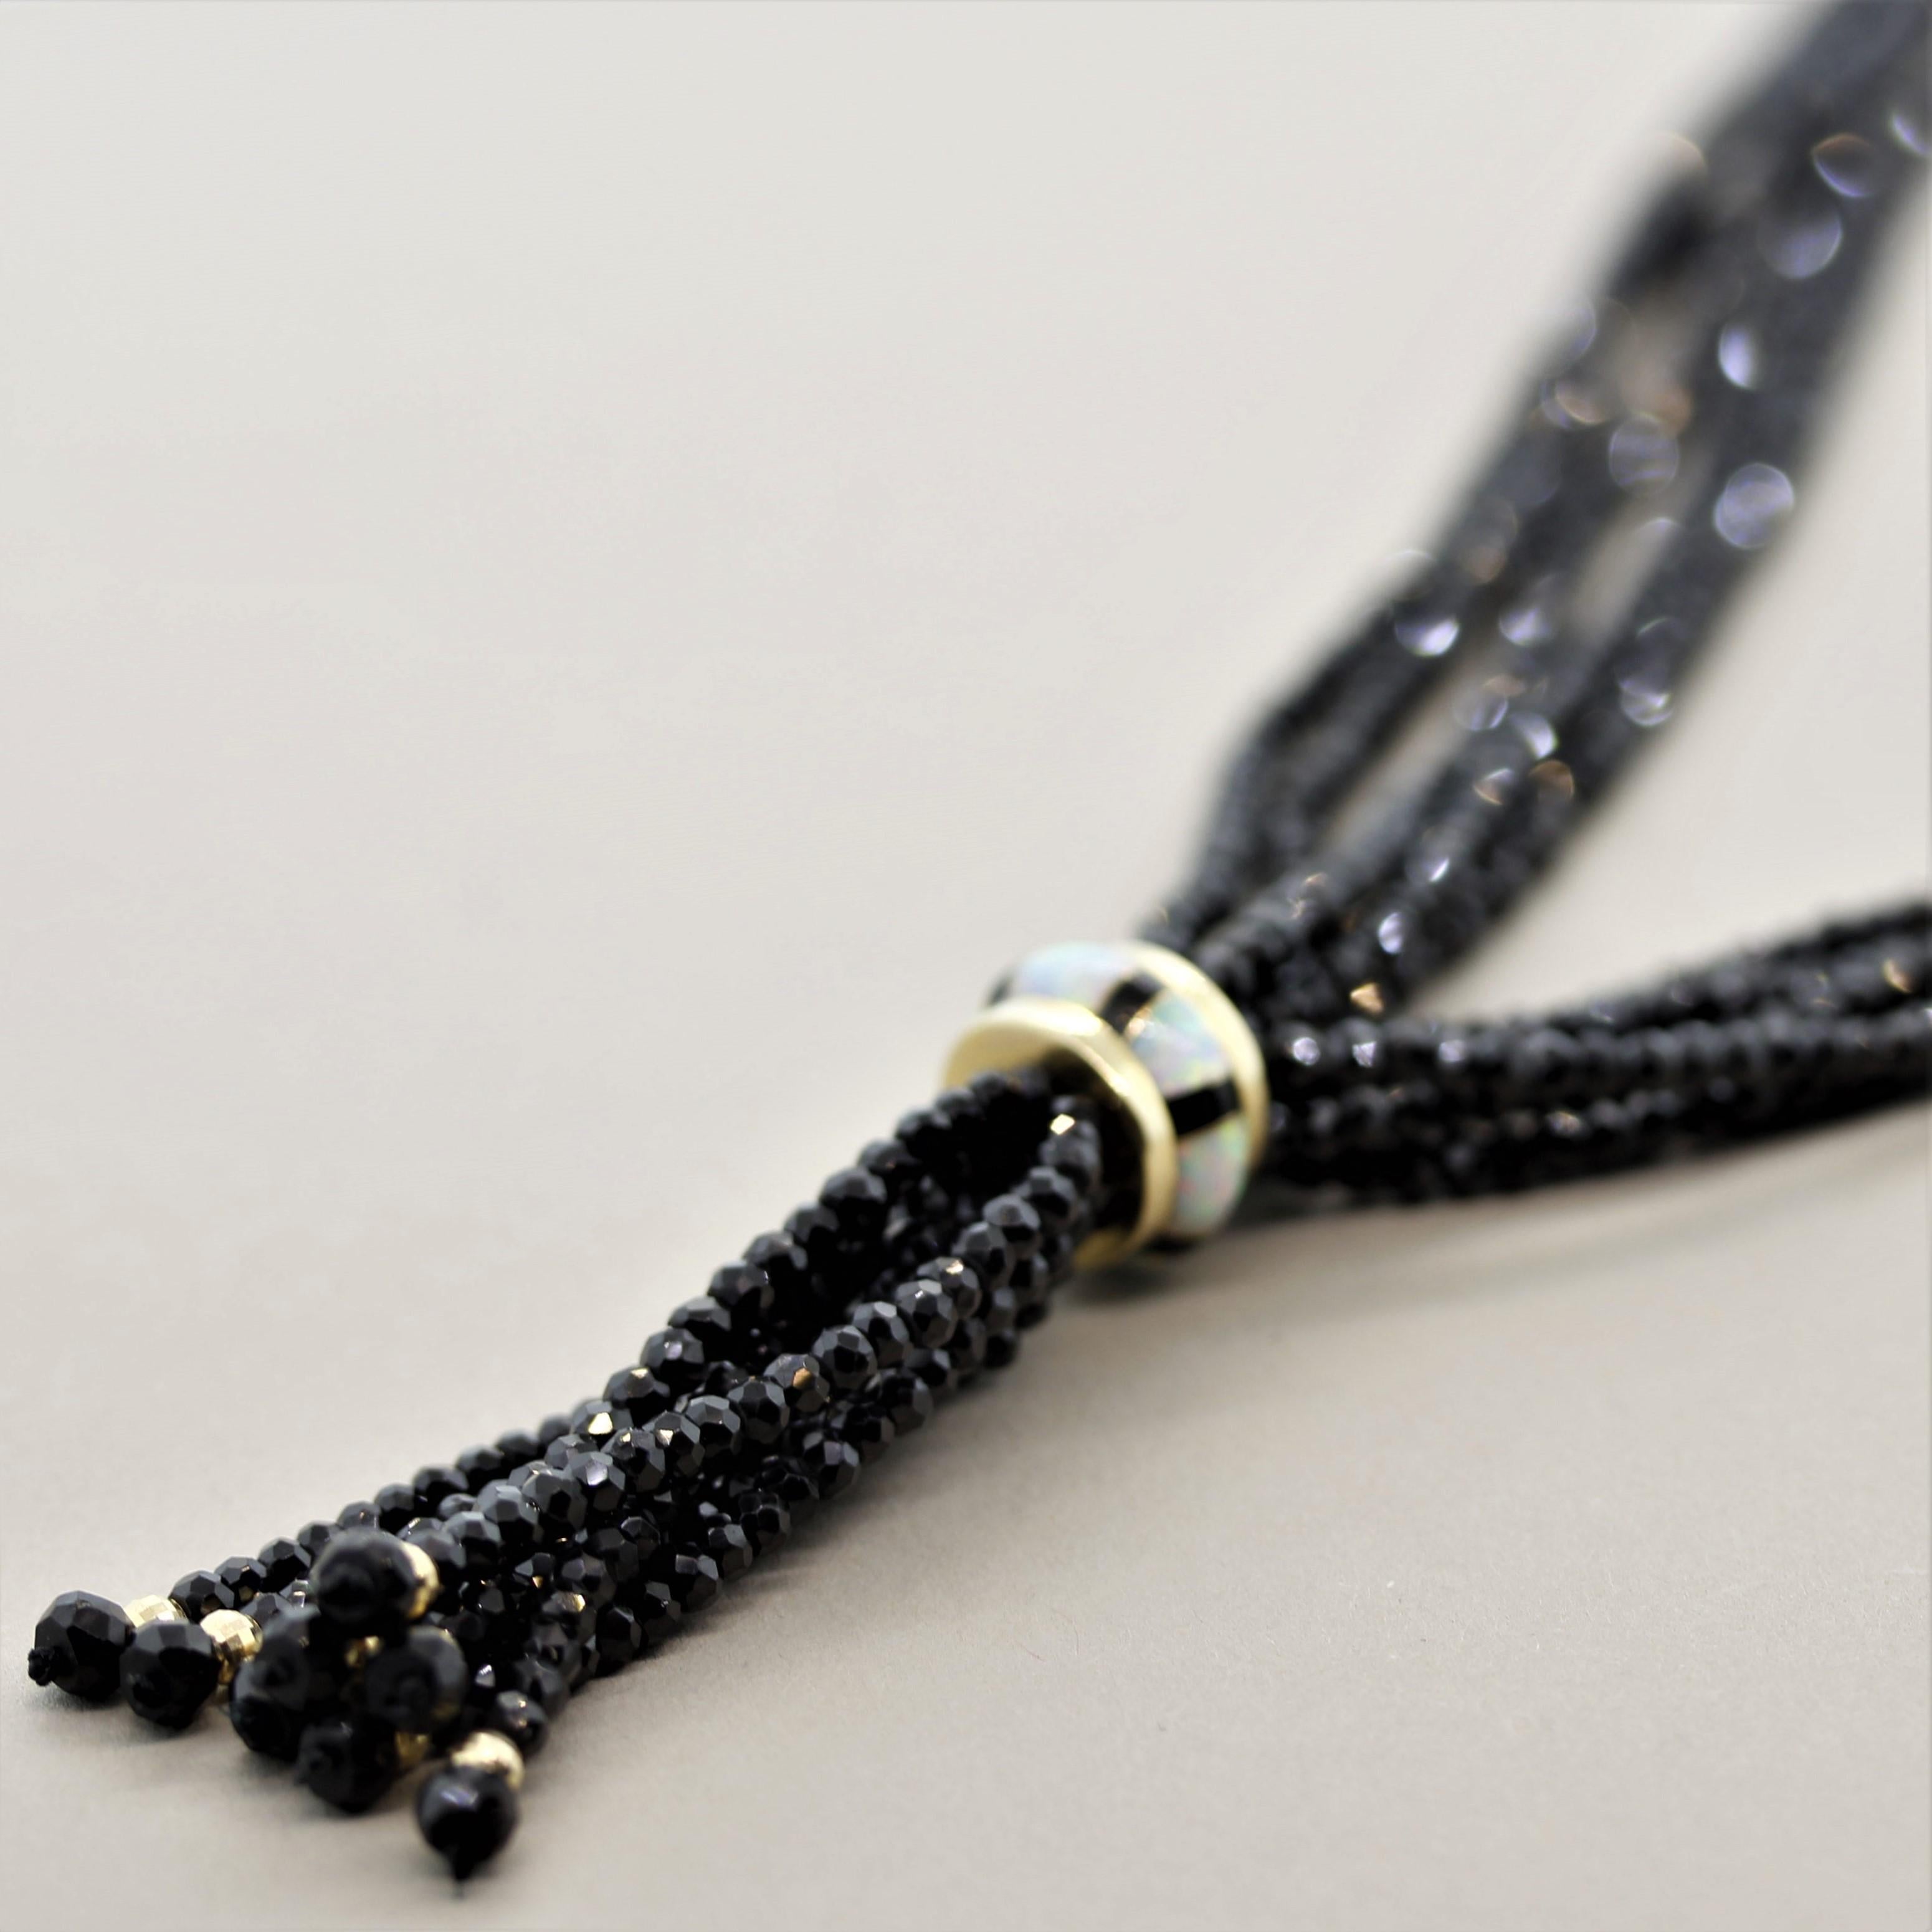 A stylish 5-strand necklace made of black spinel beads. They are joined together in the lower portion of the necklace by a gold band set with white opals with excellent play of color. The clasp is made in 14k yellow gold and ensures a safe